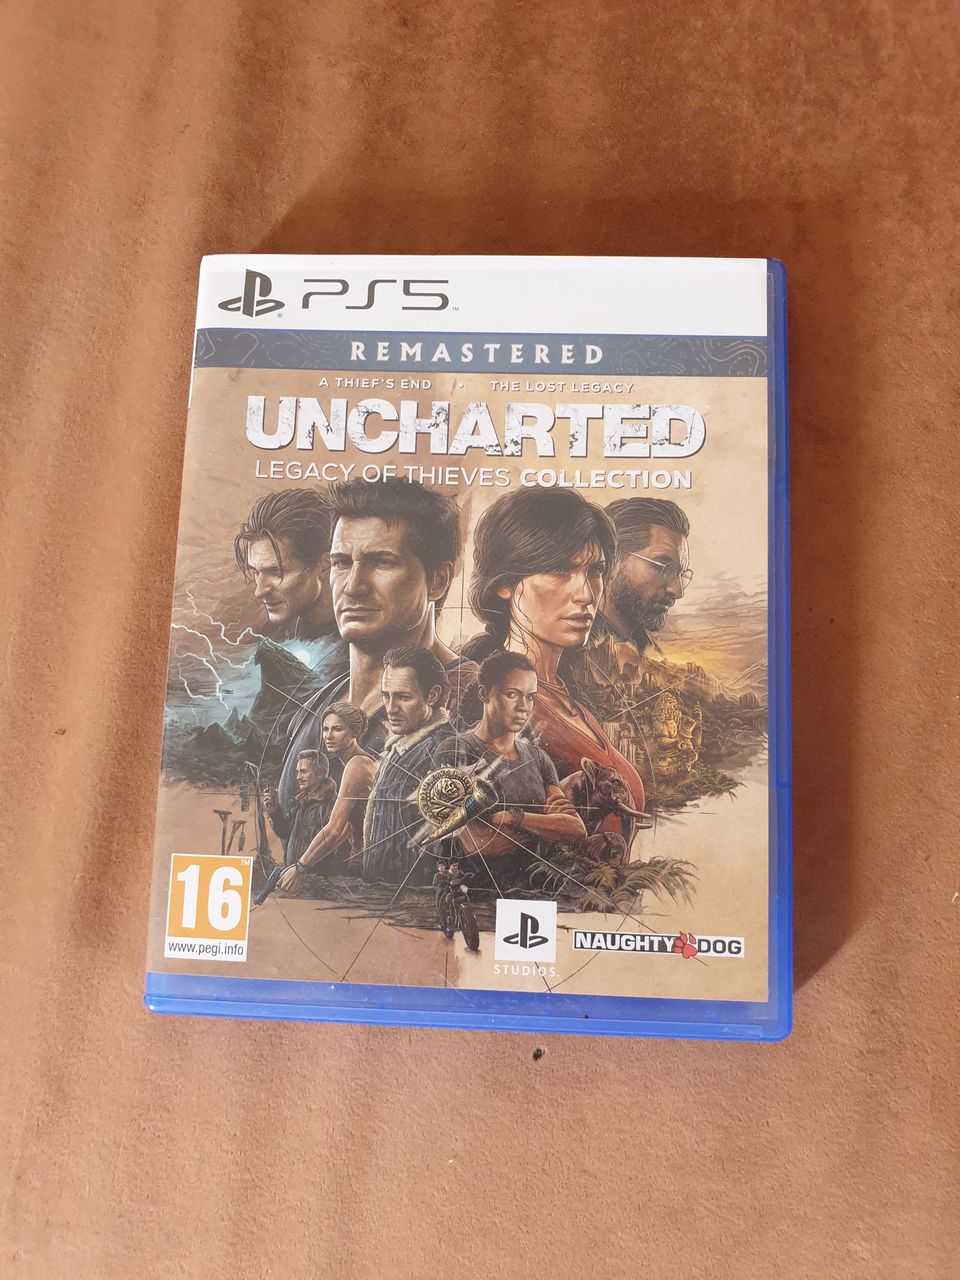 Uncharted, Legacy of thieves collection